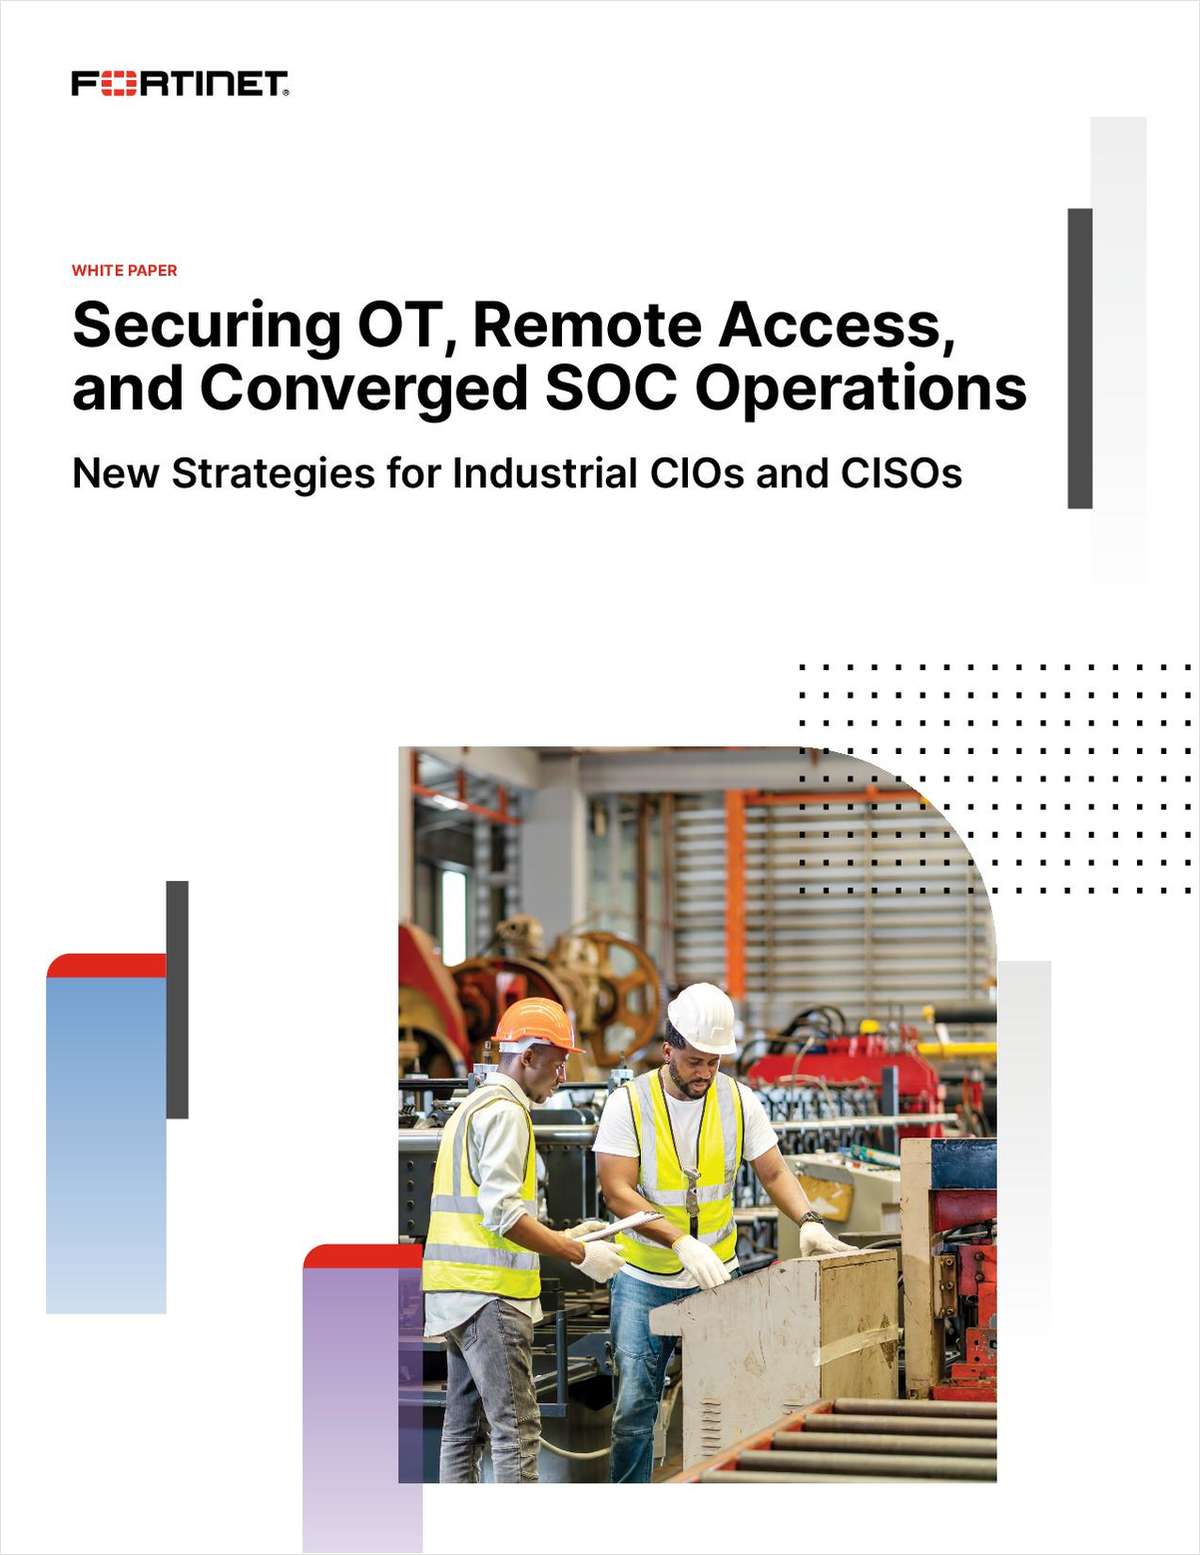 Securing OT, Remote Access and Converged SOC Operations